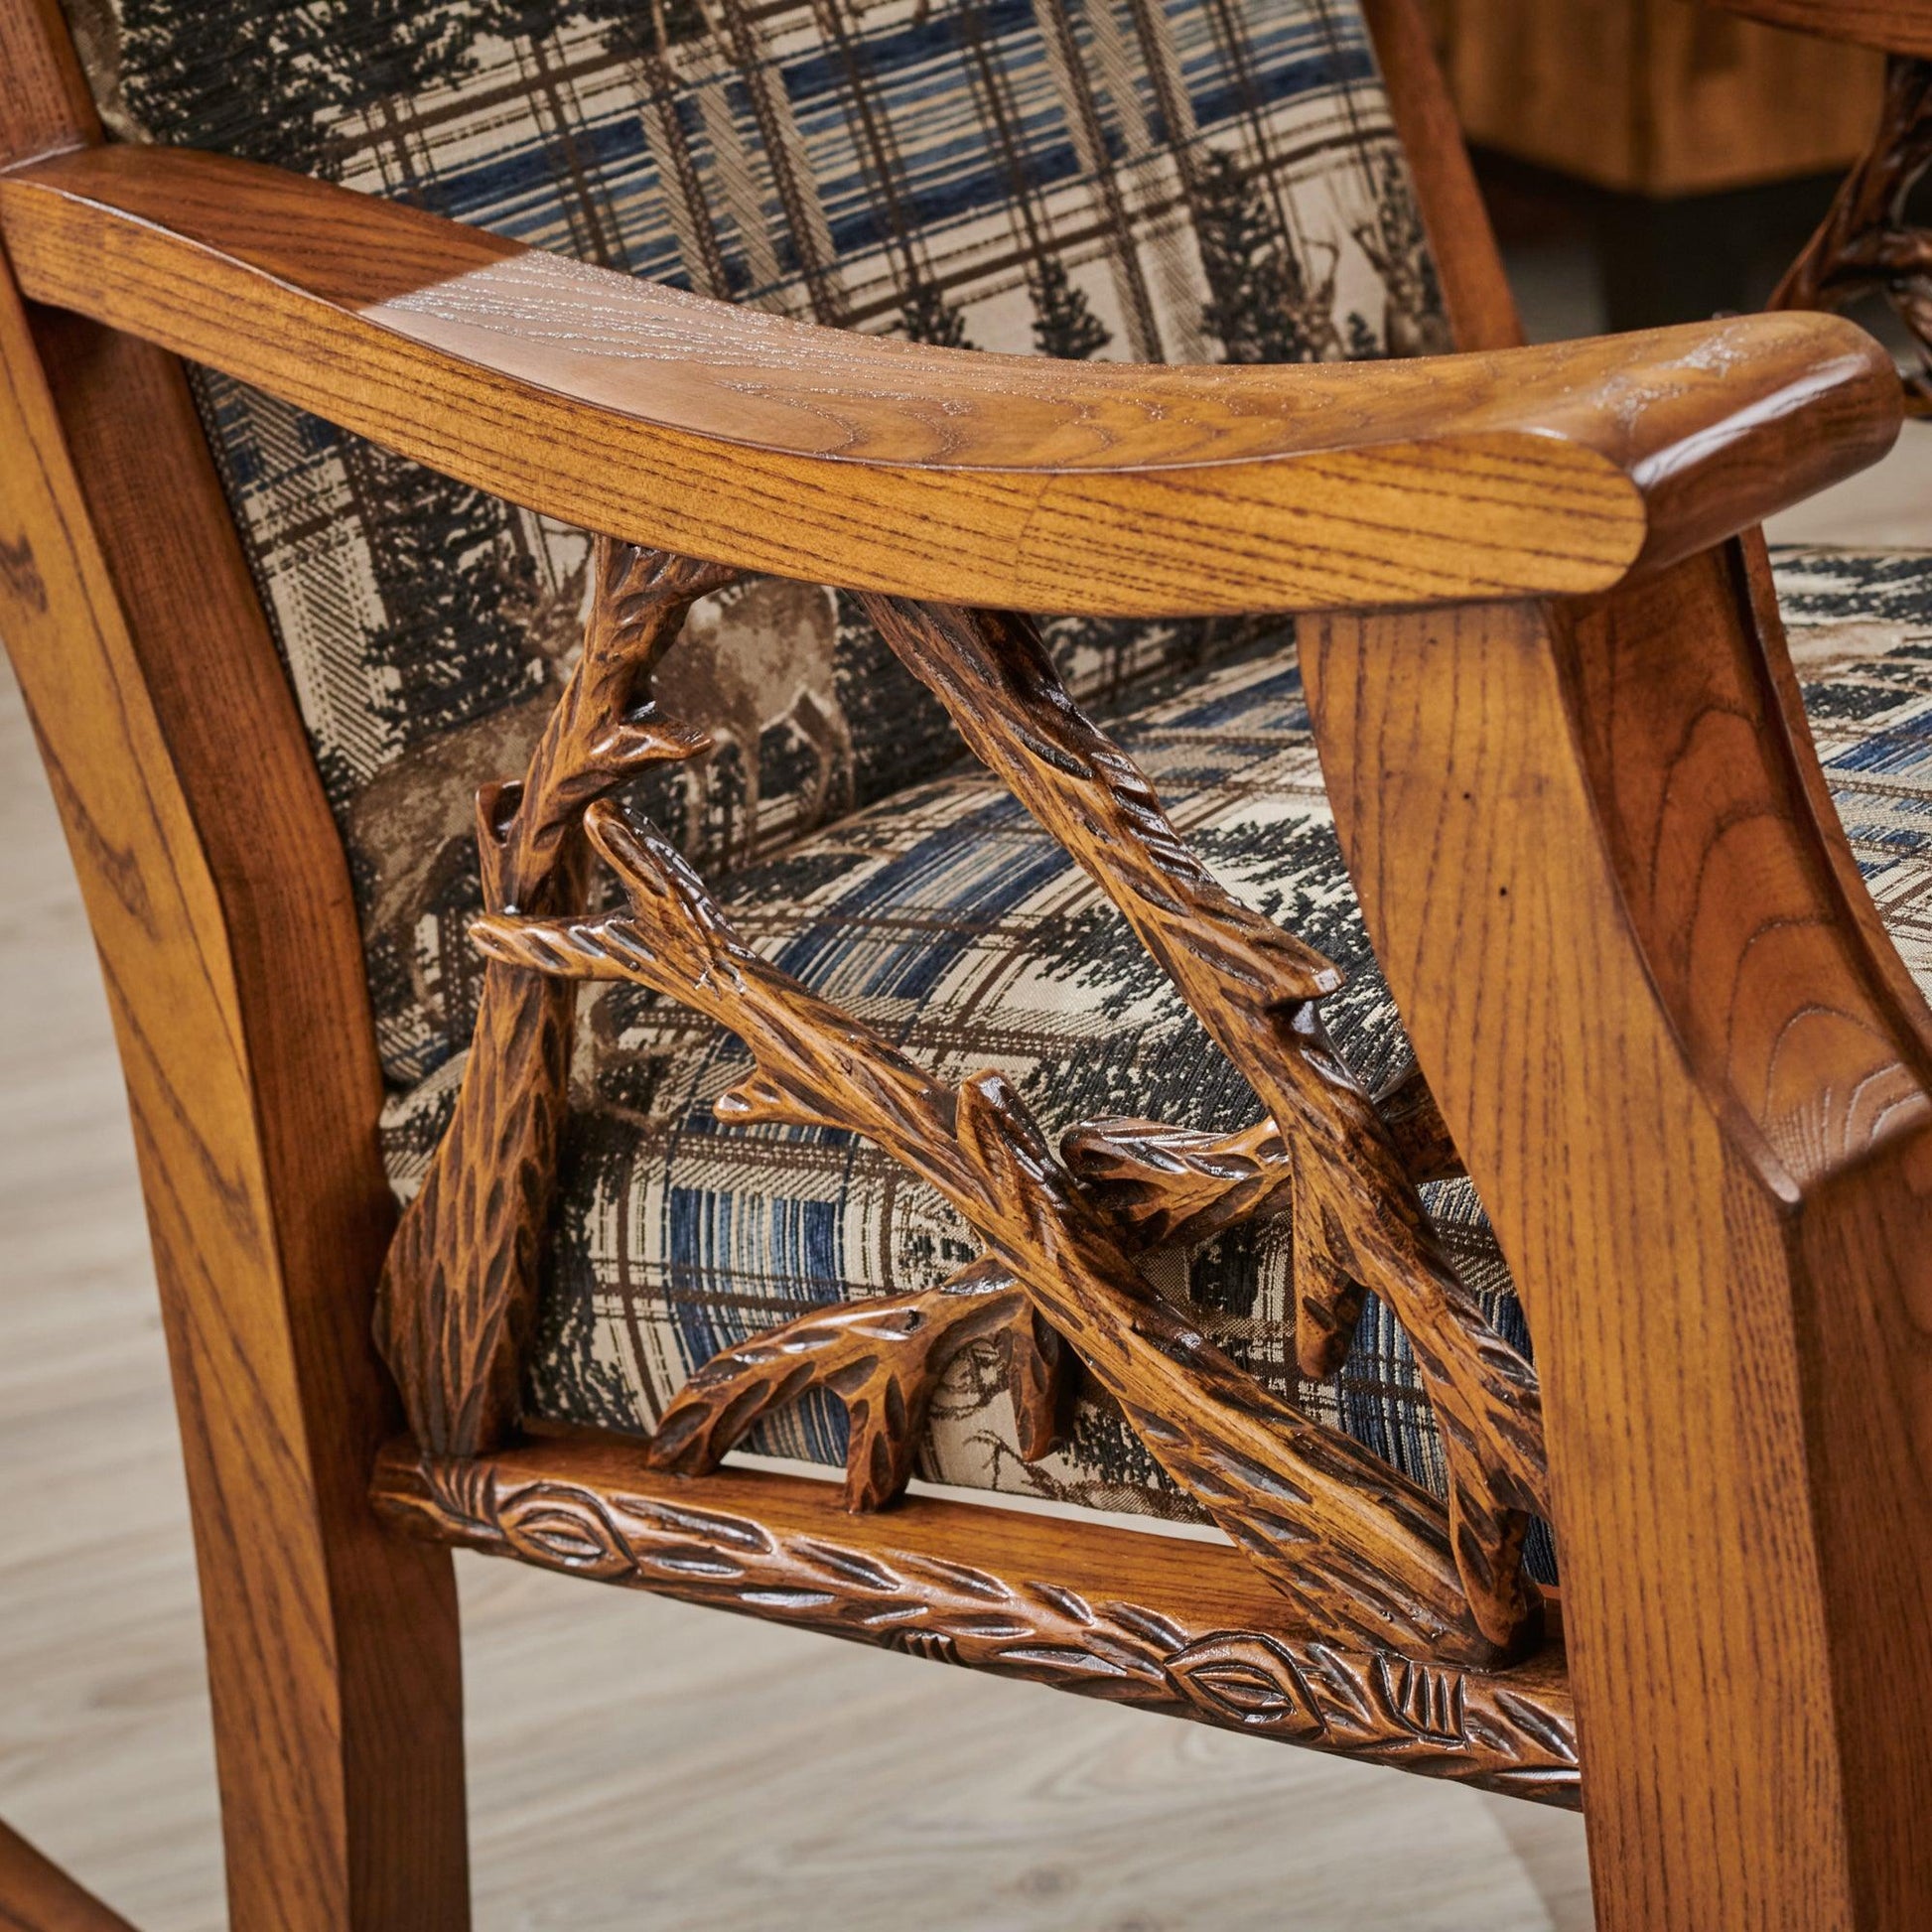 Watchful Whitetail Rocking Chair - Wild Wings